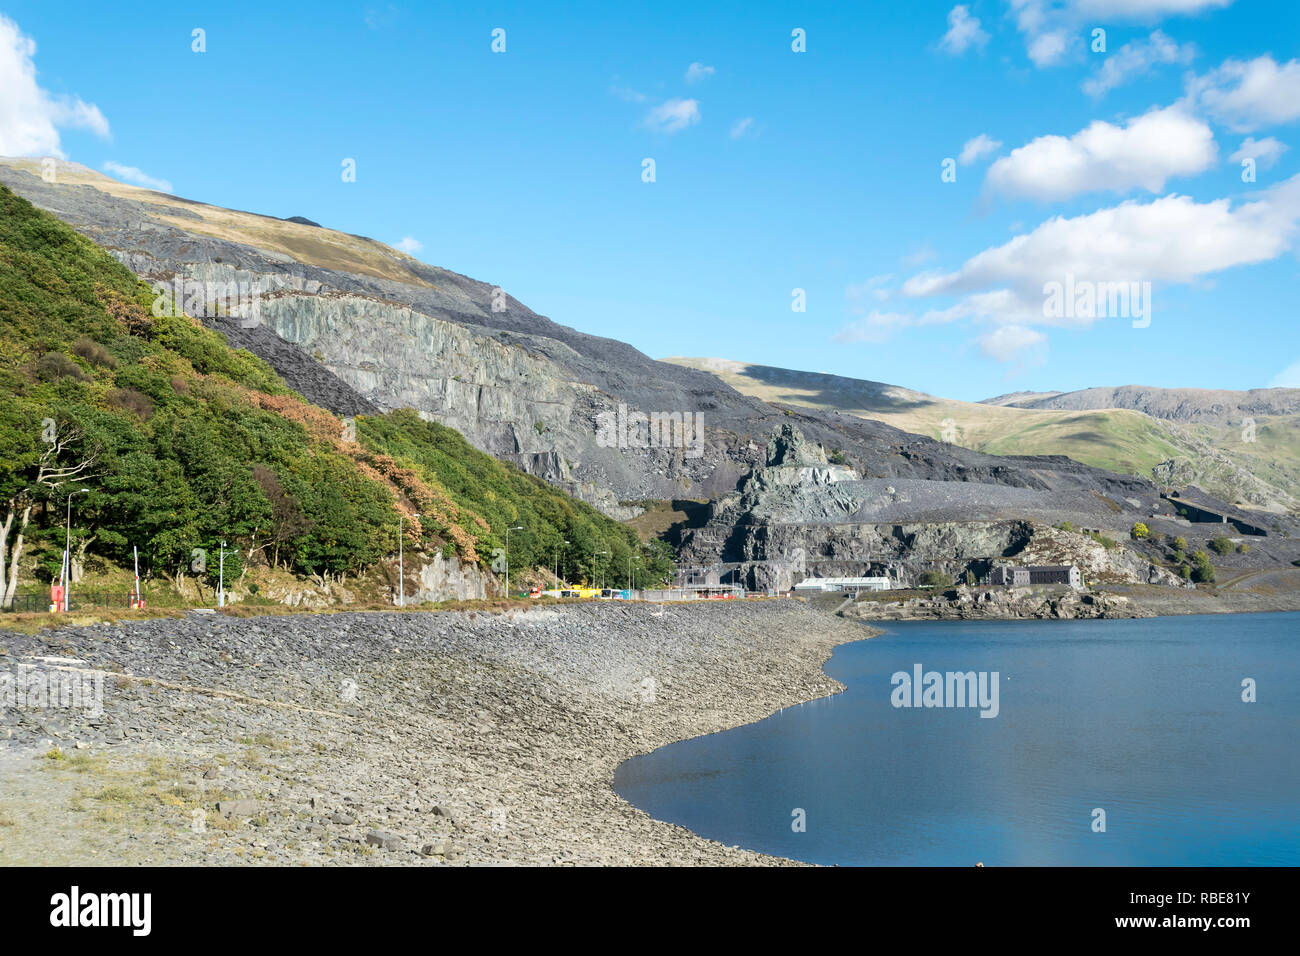 Llyn Peris lake at the base of the Dinorwig Power Station in North Wales Stock Photo